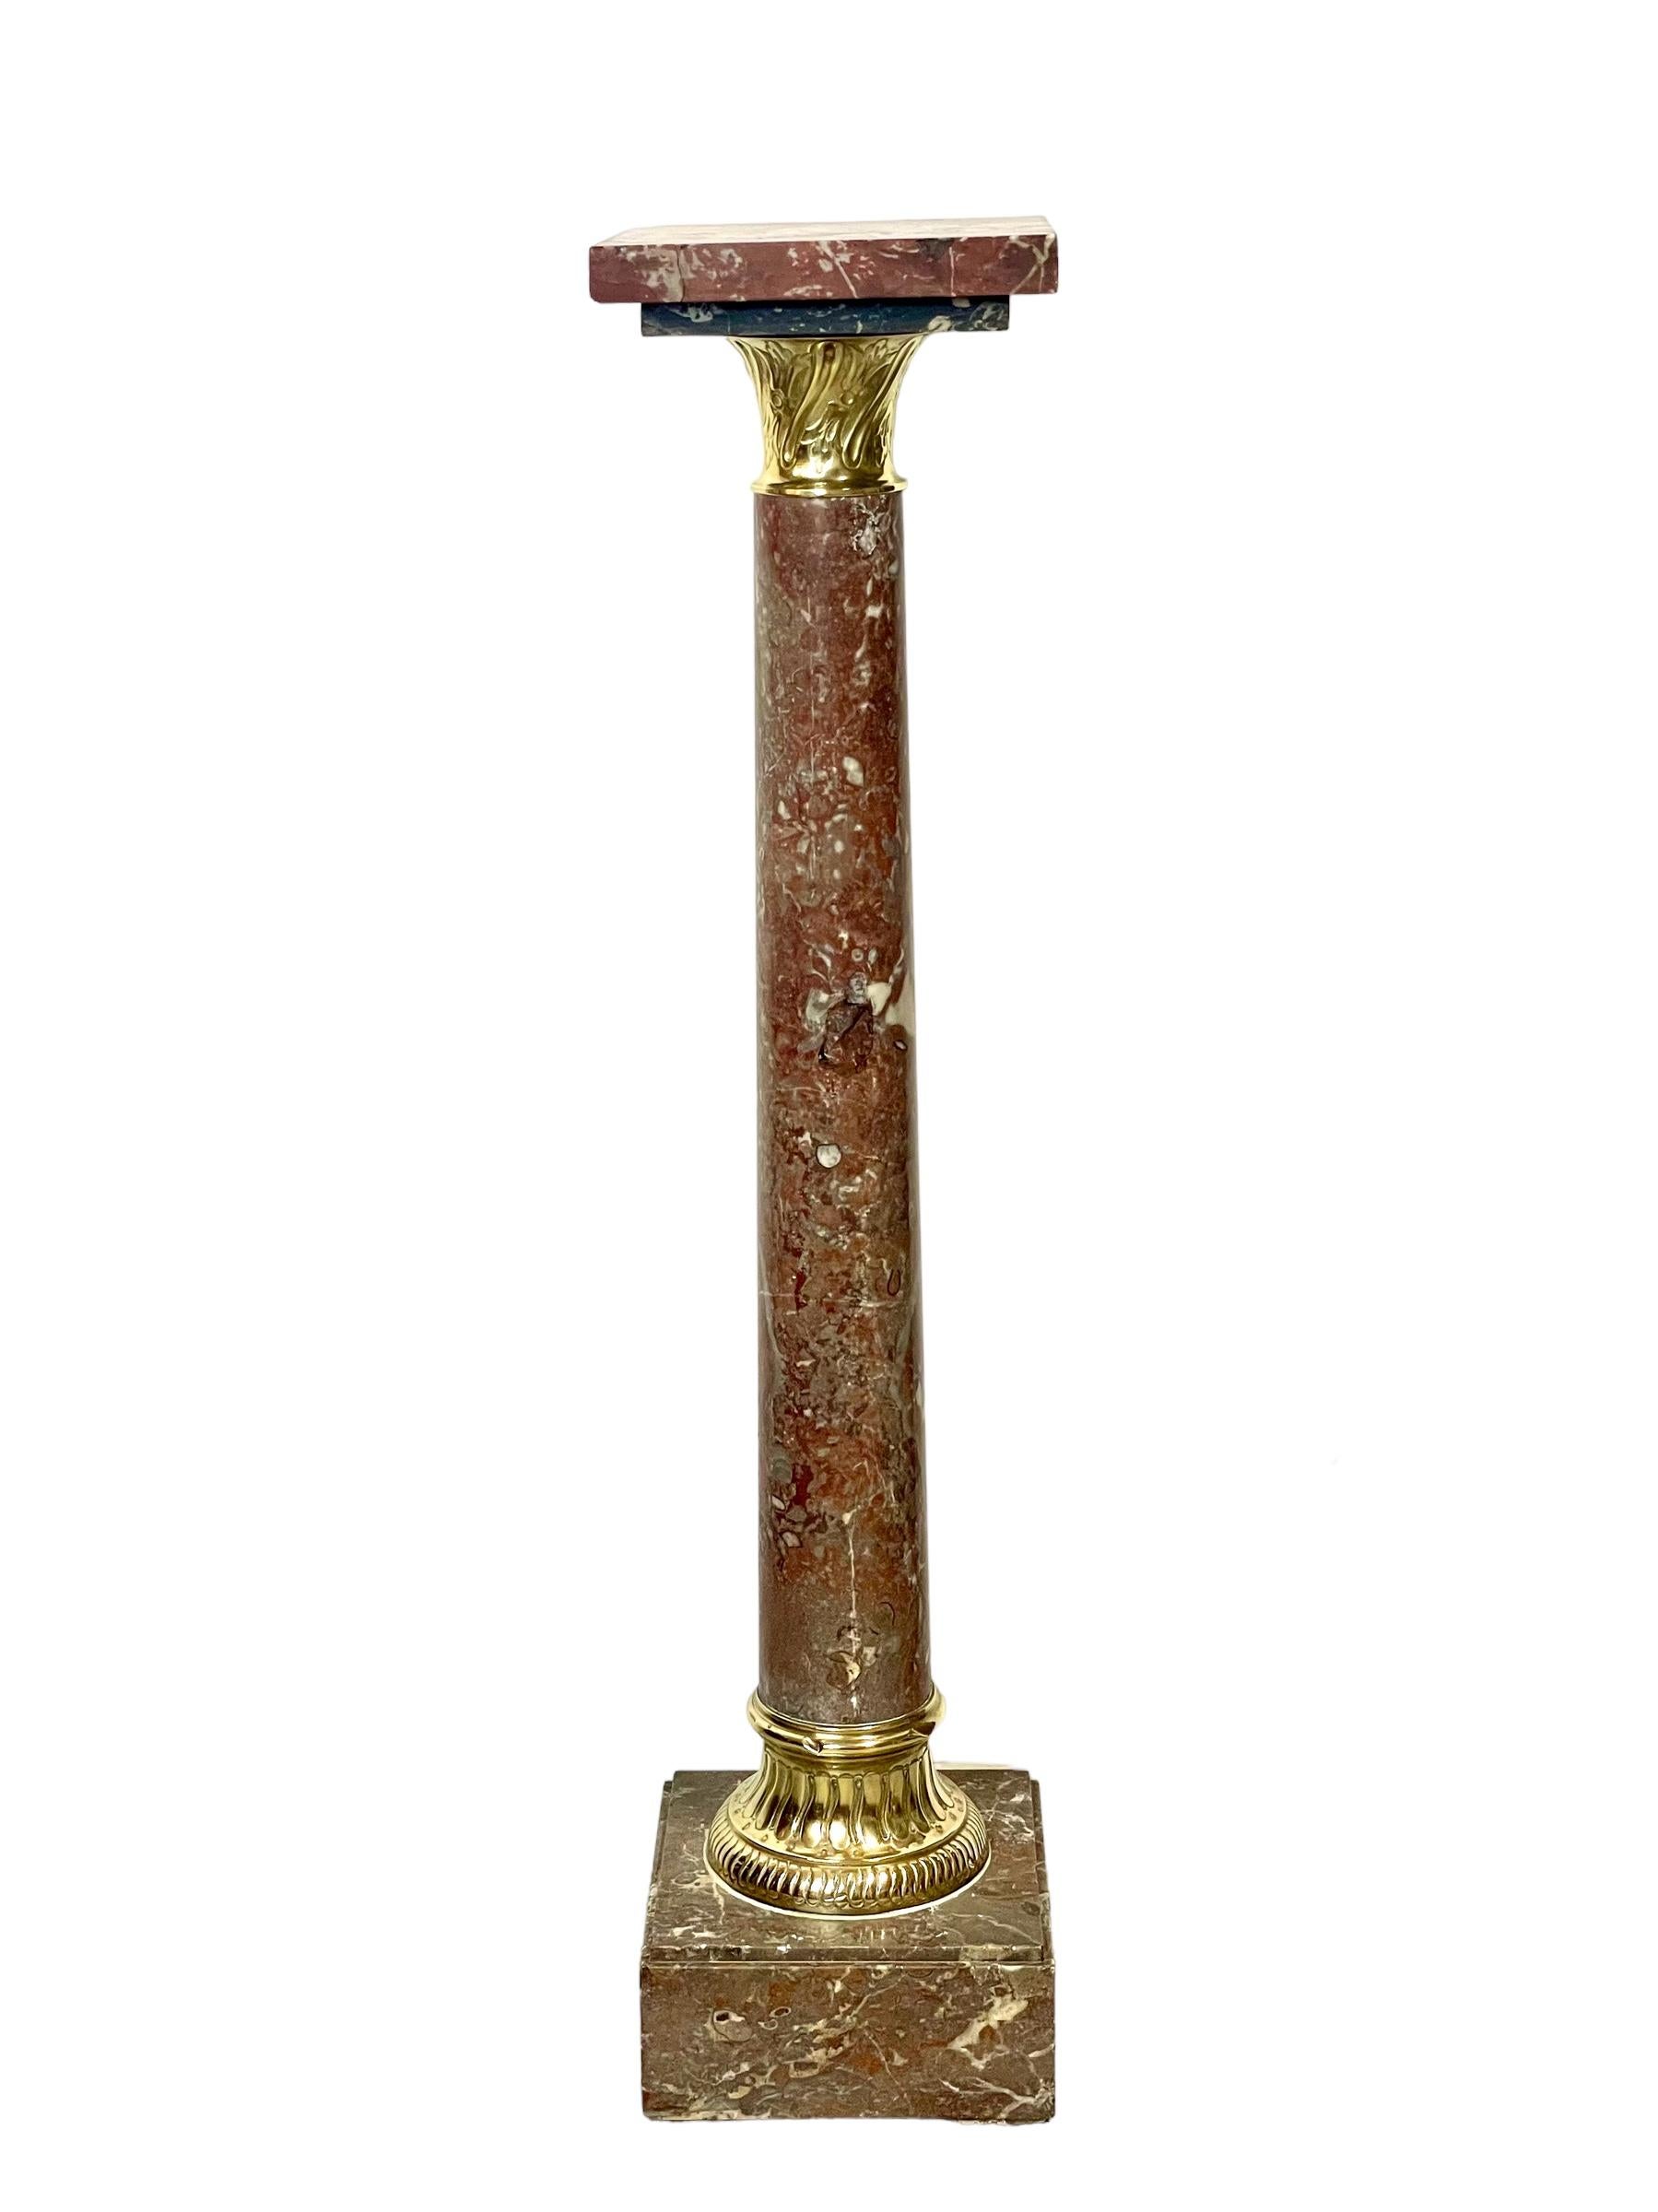 A spectacular gilt-bronze mounted pedestal, hand-carved from deep-red veined marble, and ideal for the display of a large and valued indoor plant or piece of sculpture. This decorative column features a square tray resting on a smaller, grey marble